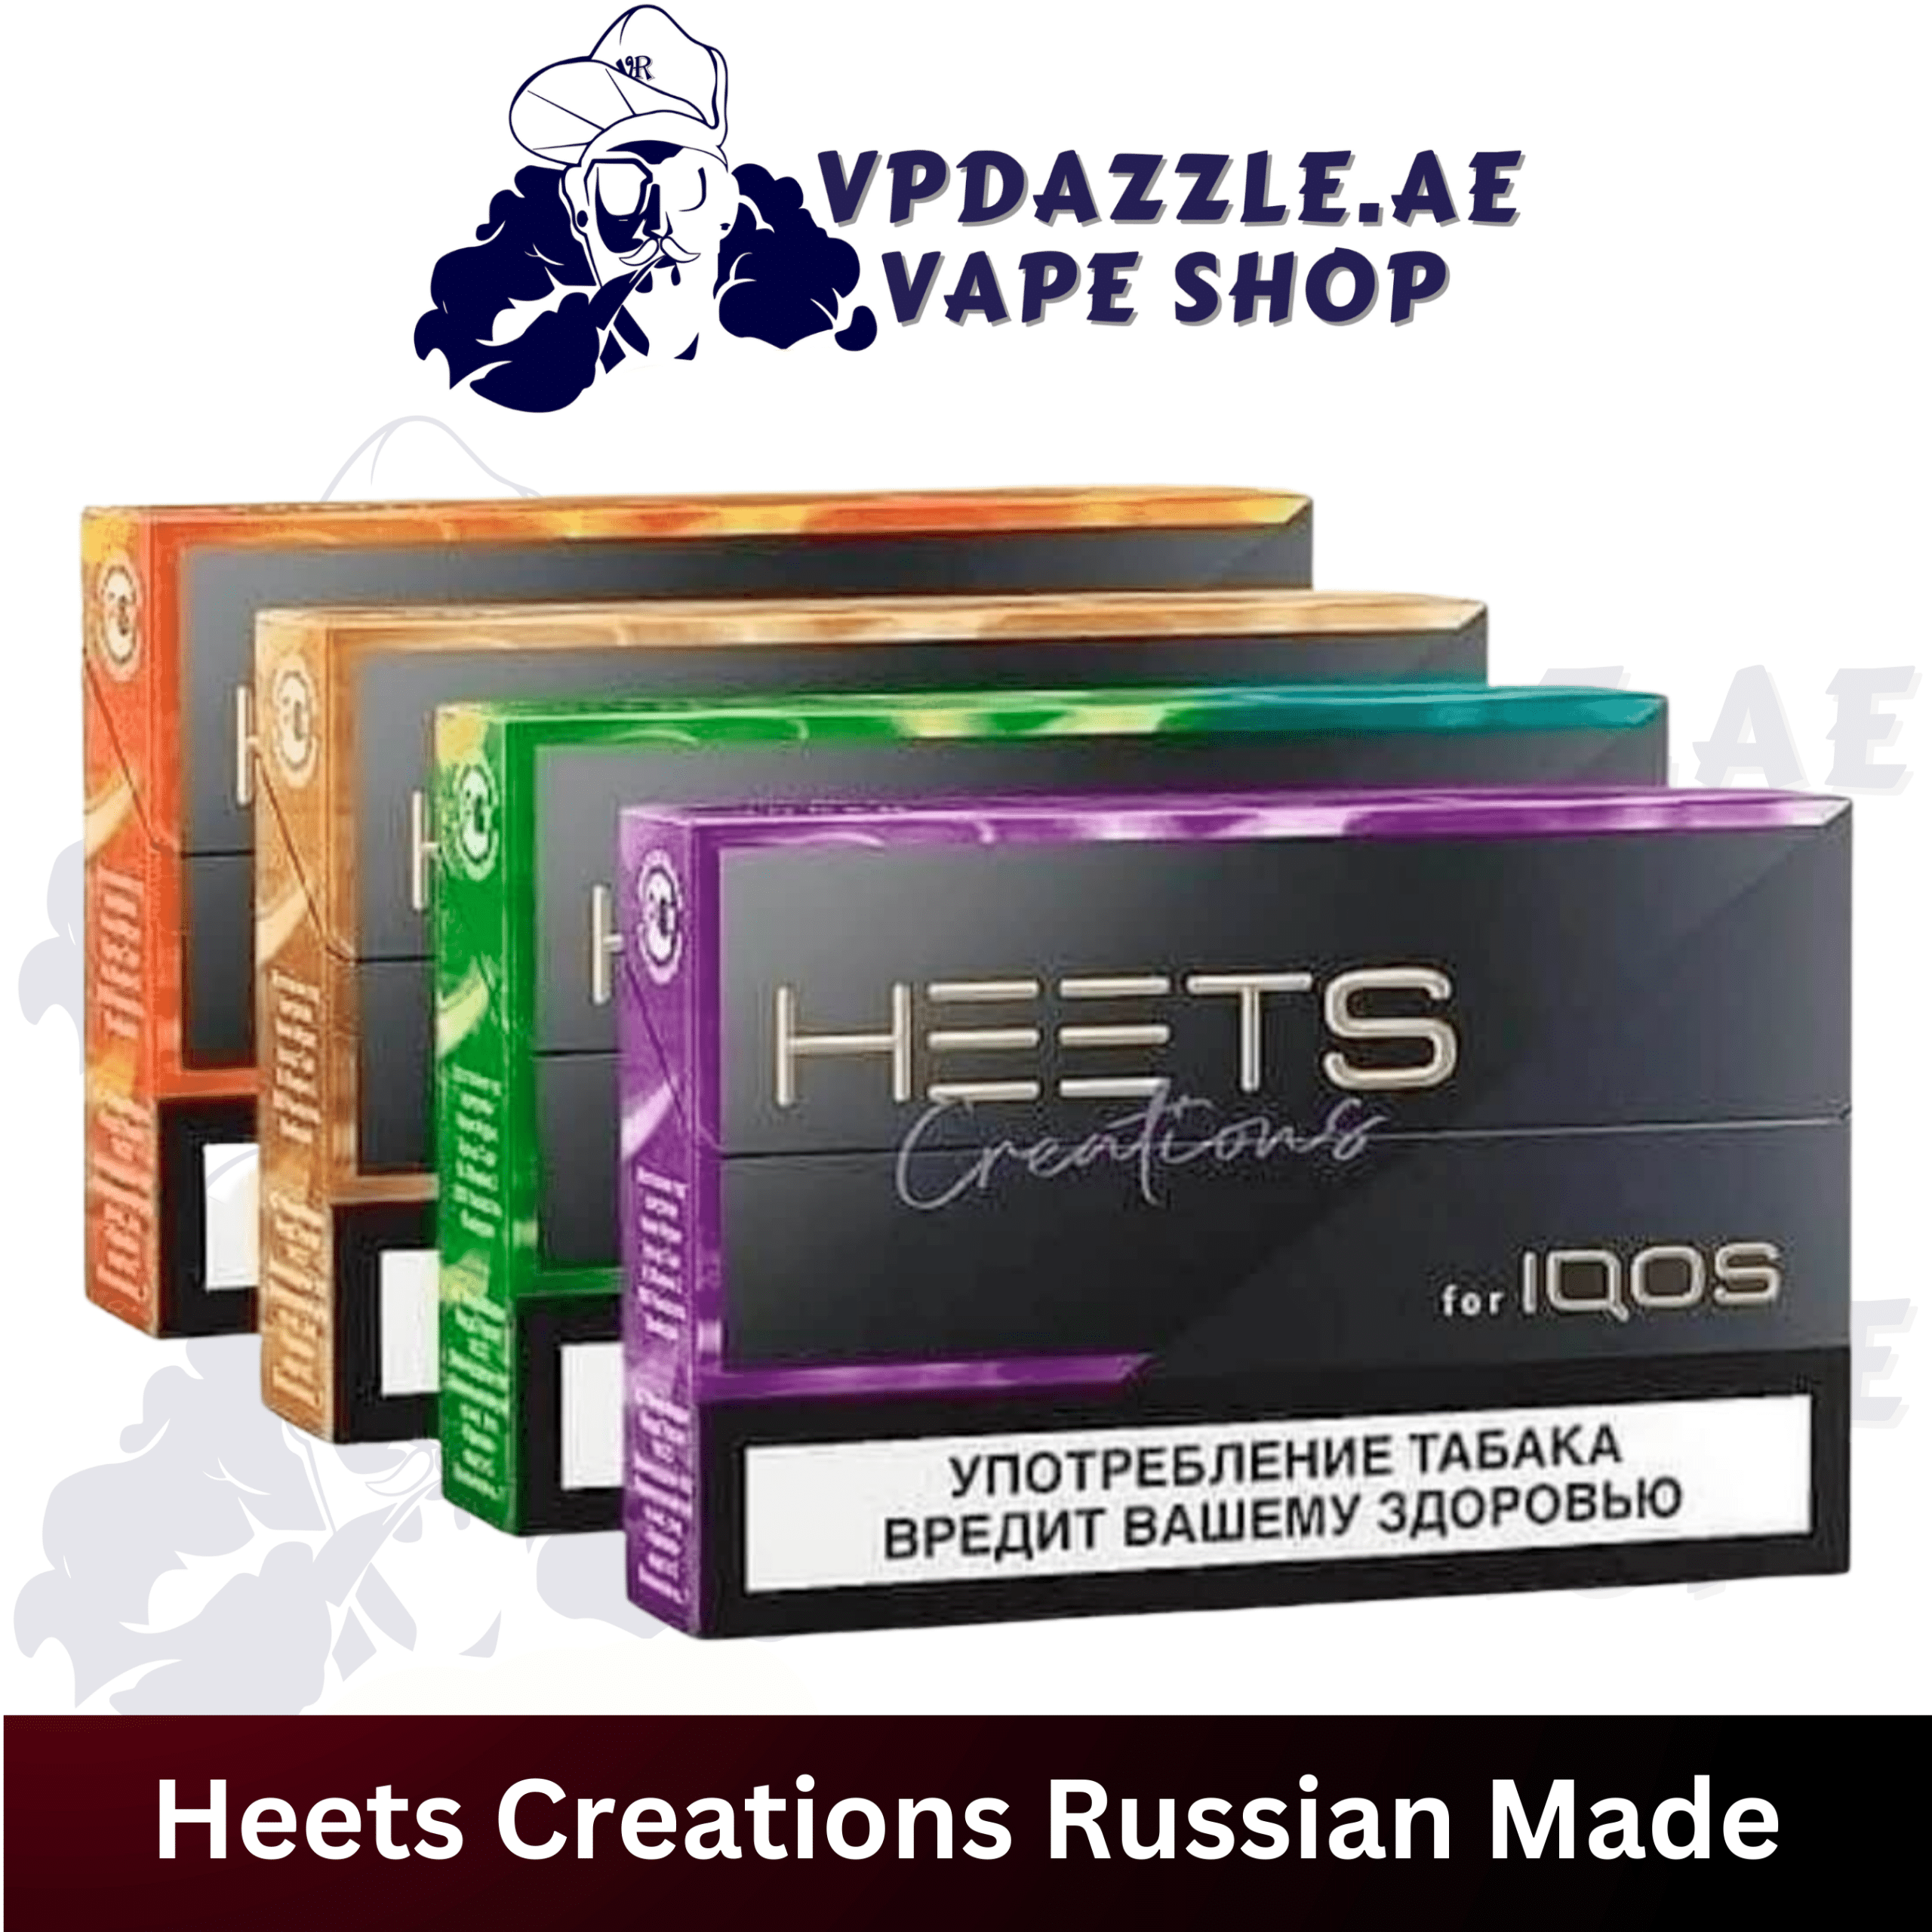 https://vpdazzle.ae/wp-content/uploads/2022/10/Heets-Creations-Russian-Made.png